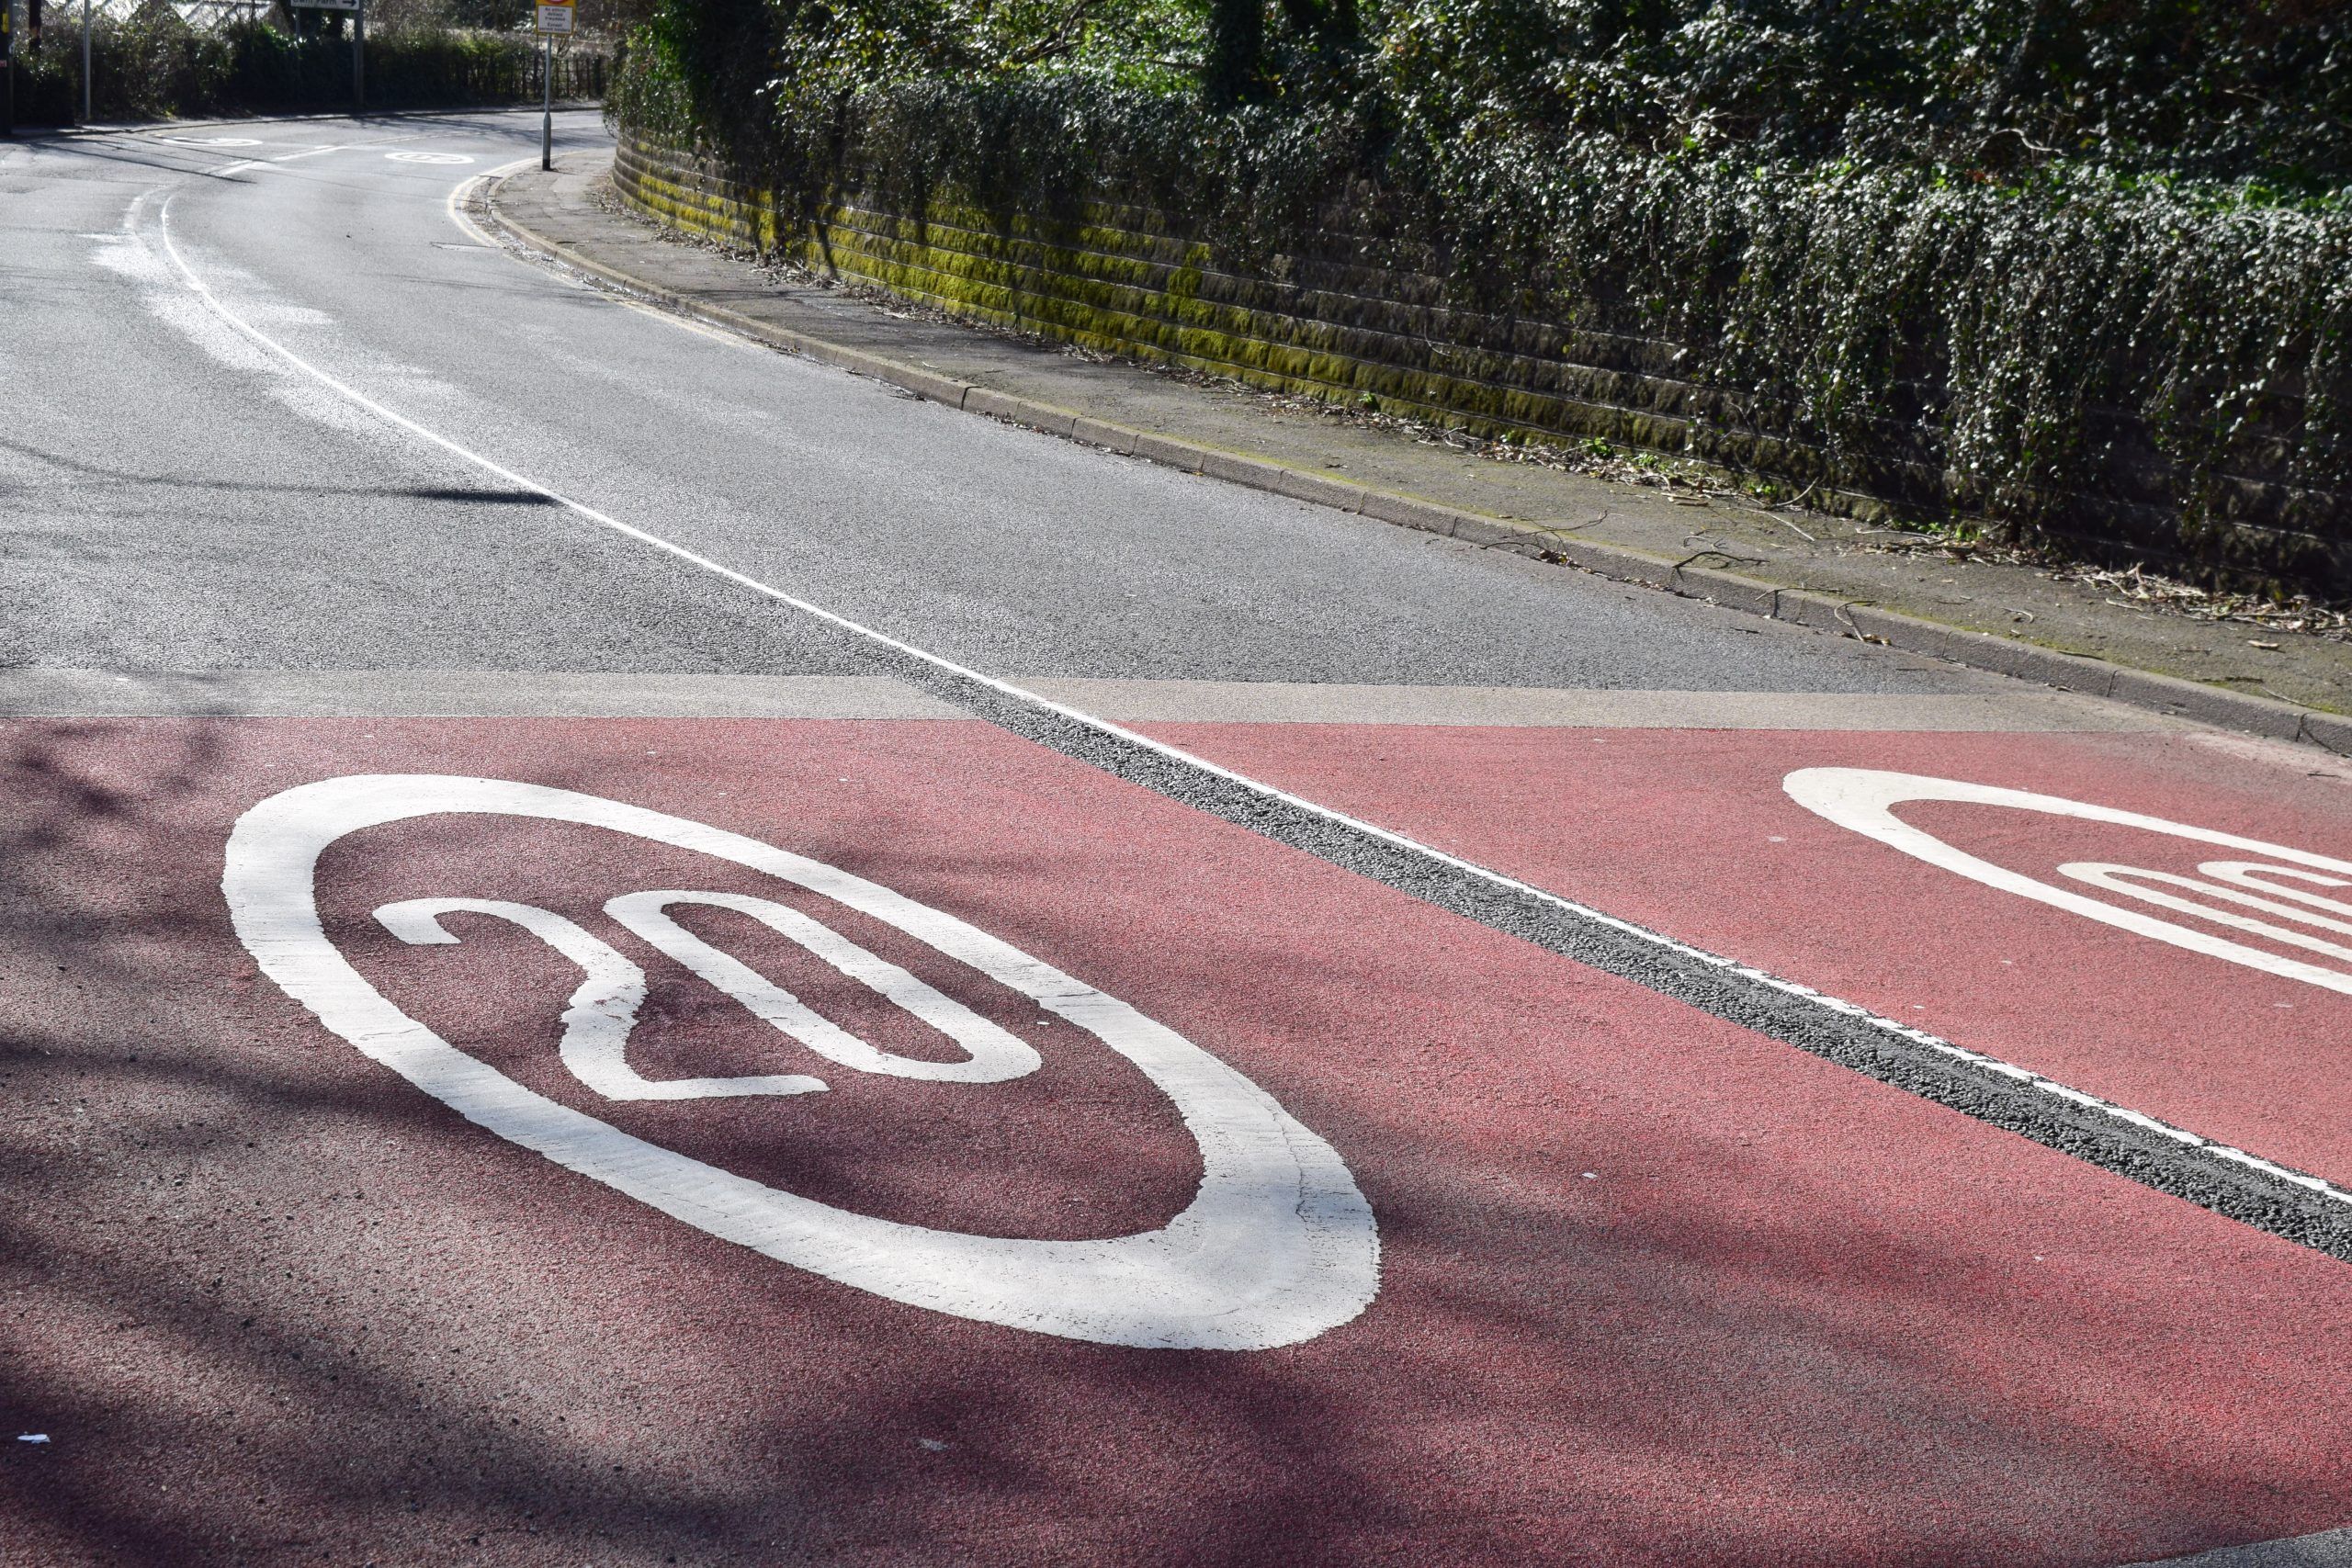 20mph painted on road surface